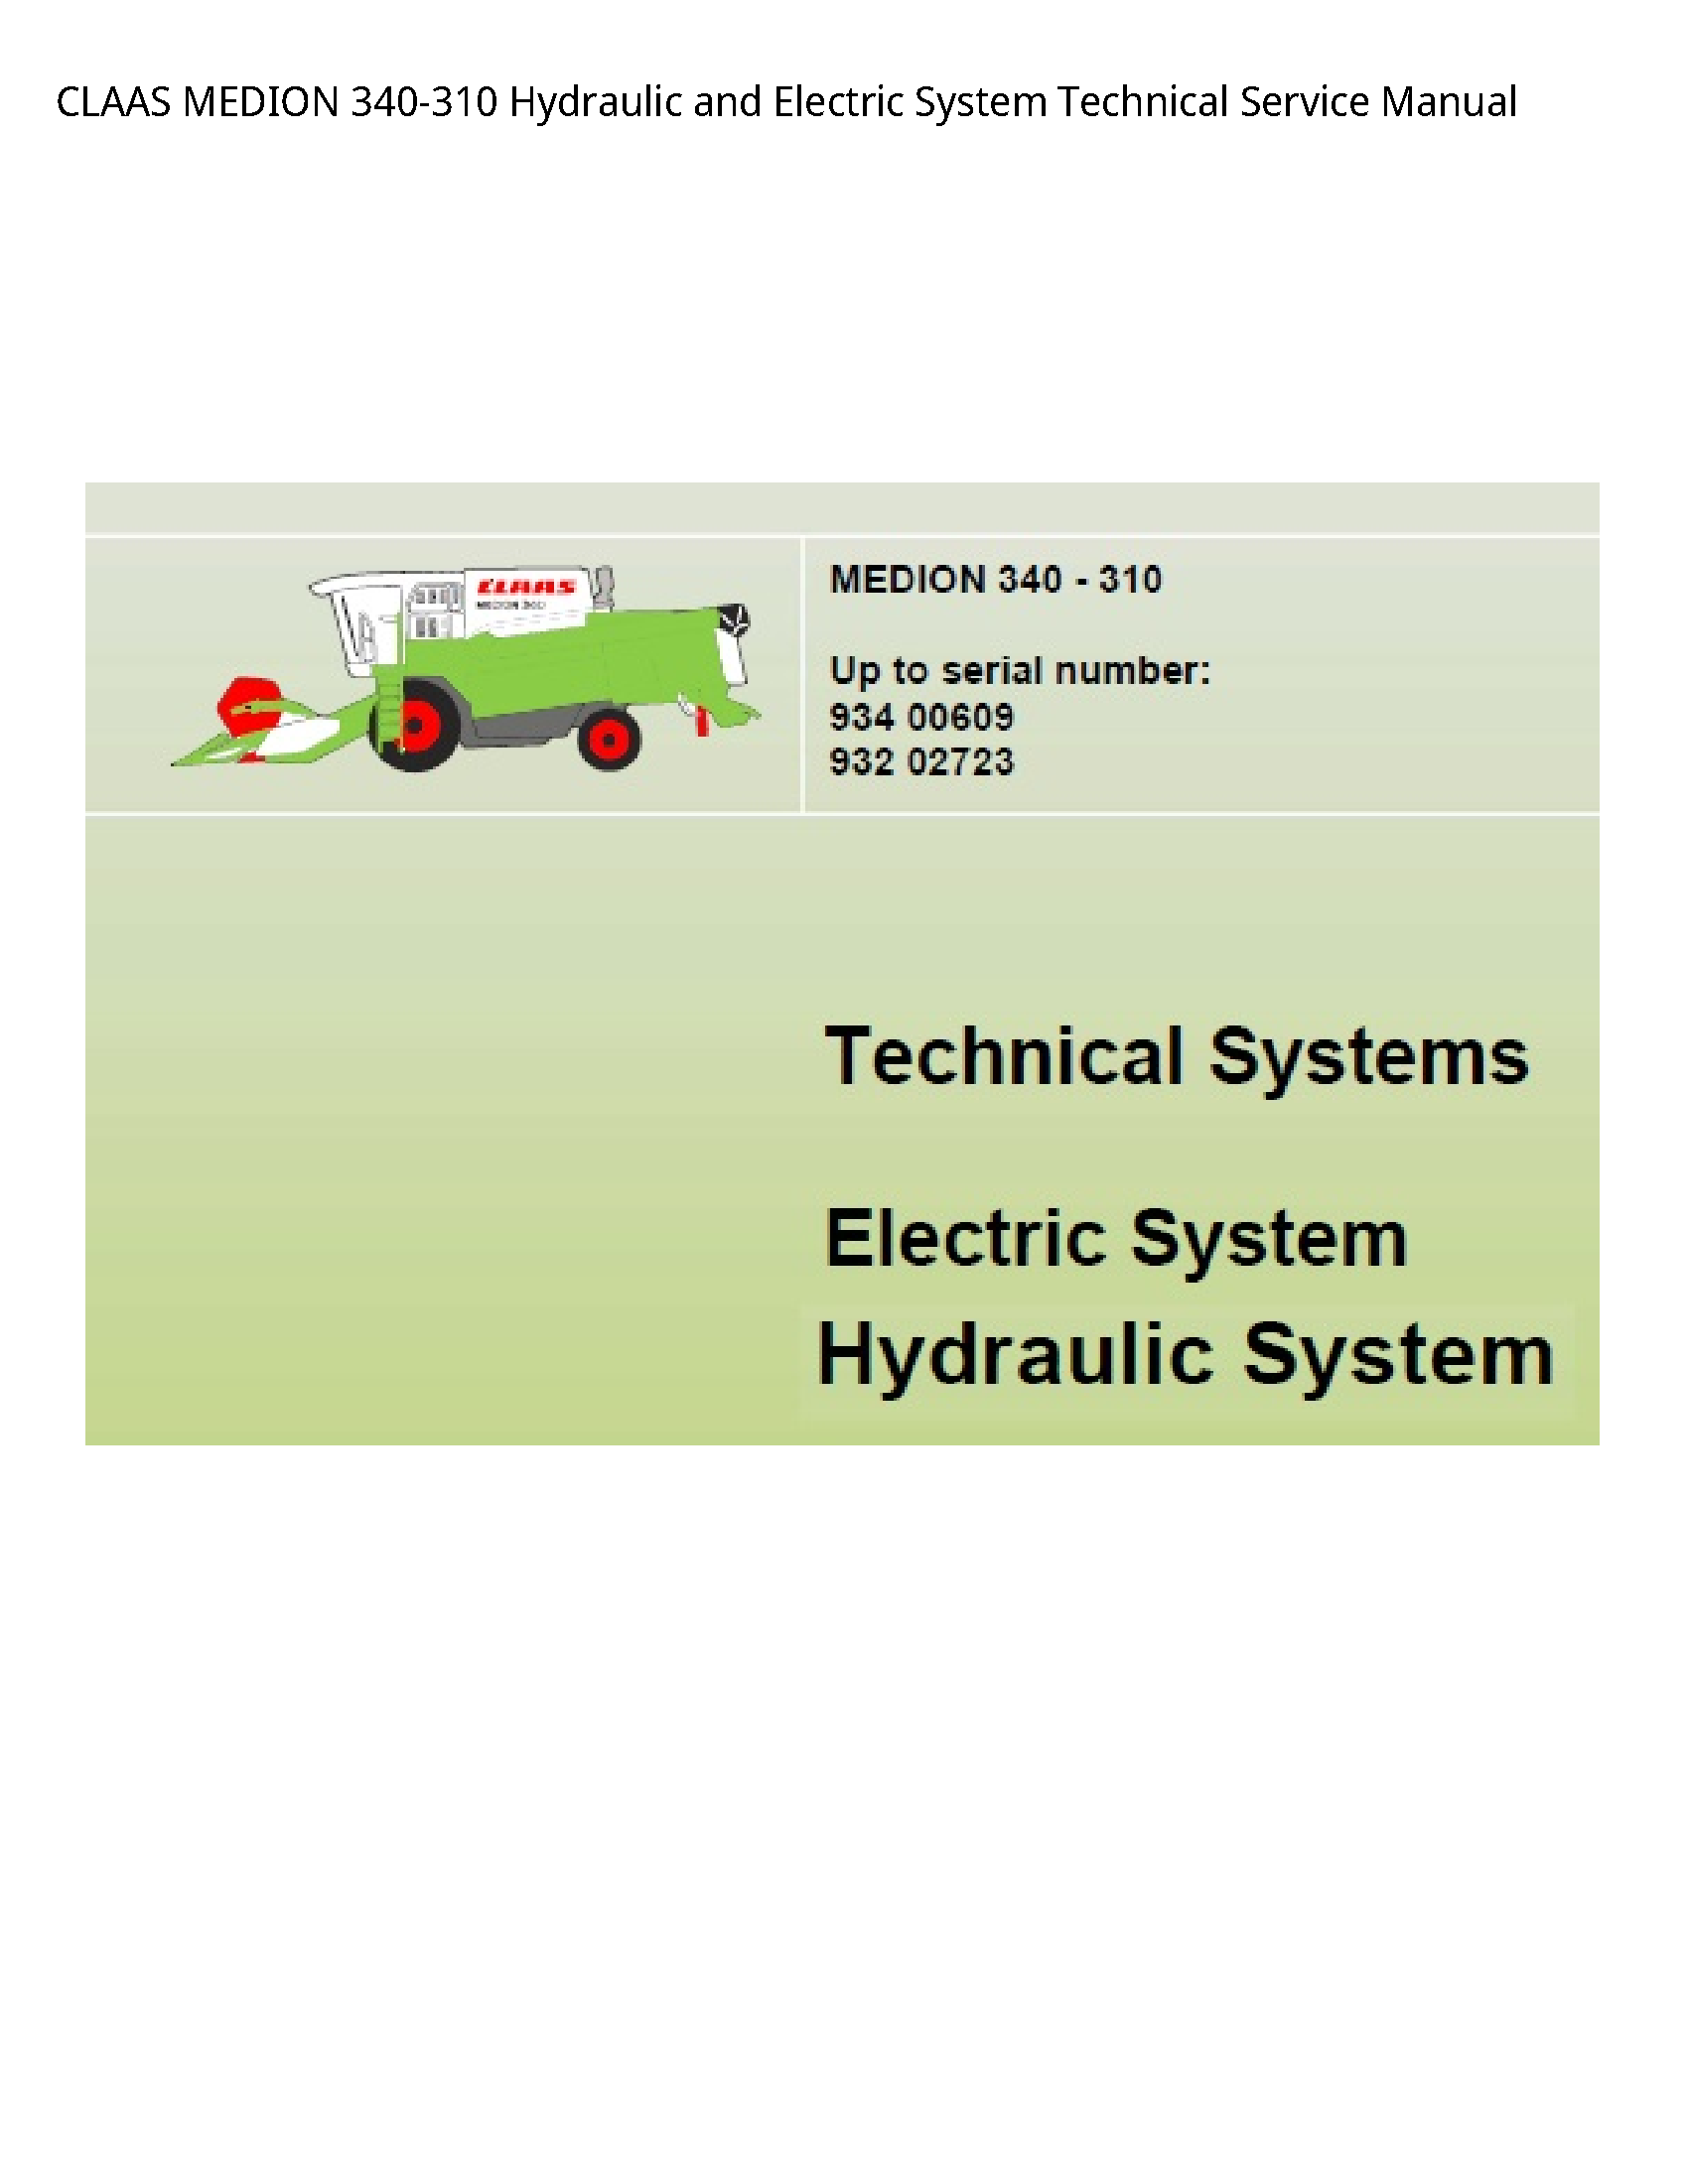 Claas 340-310 MEDION Hydraulic  Electric System Technical Service manual